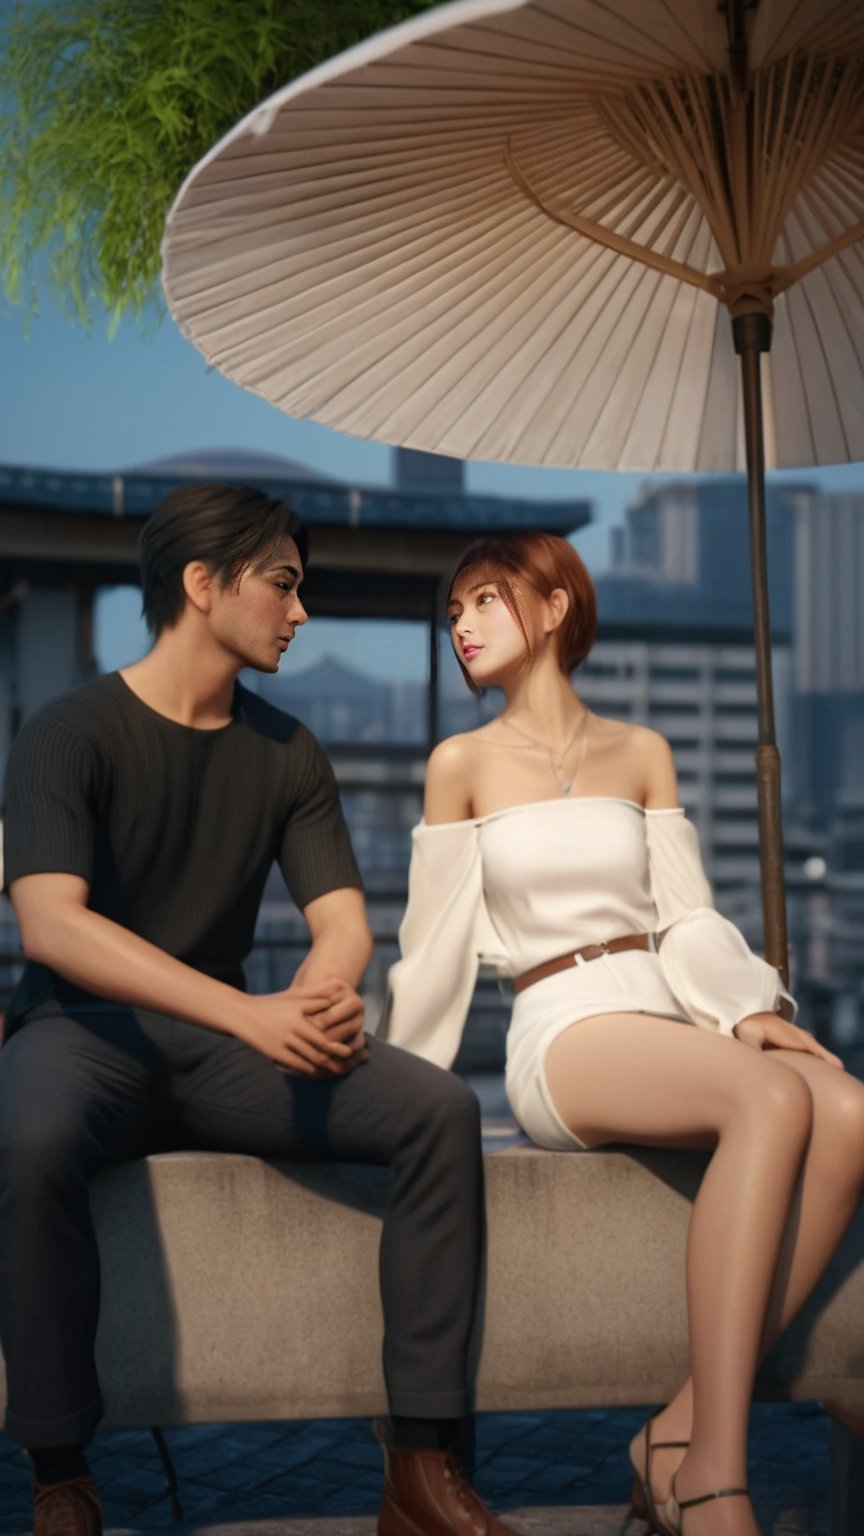 Akihiko Yoshida's rooftop oasis: Two silhouettes entwined under an umbrella's gentle curve, set against Tokyo's urban sprawl. Unreal Engine's realistic afternoon lighting casts a warm glow on the couple's tender pose, as if suspended in time. Soft focus and 8K resolution create a sensual atmosphere, reminiscent of Guweiz's artwork. Trending on CGStation, this cinematic scene embodies Square Enix's style game. A romantic getaway, captured in vivid 3D anime realism.